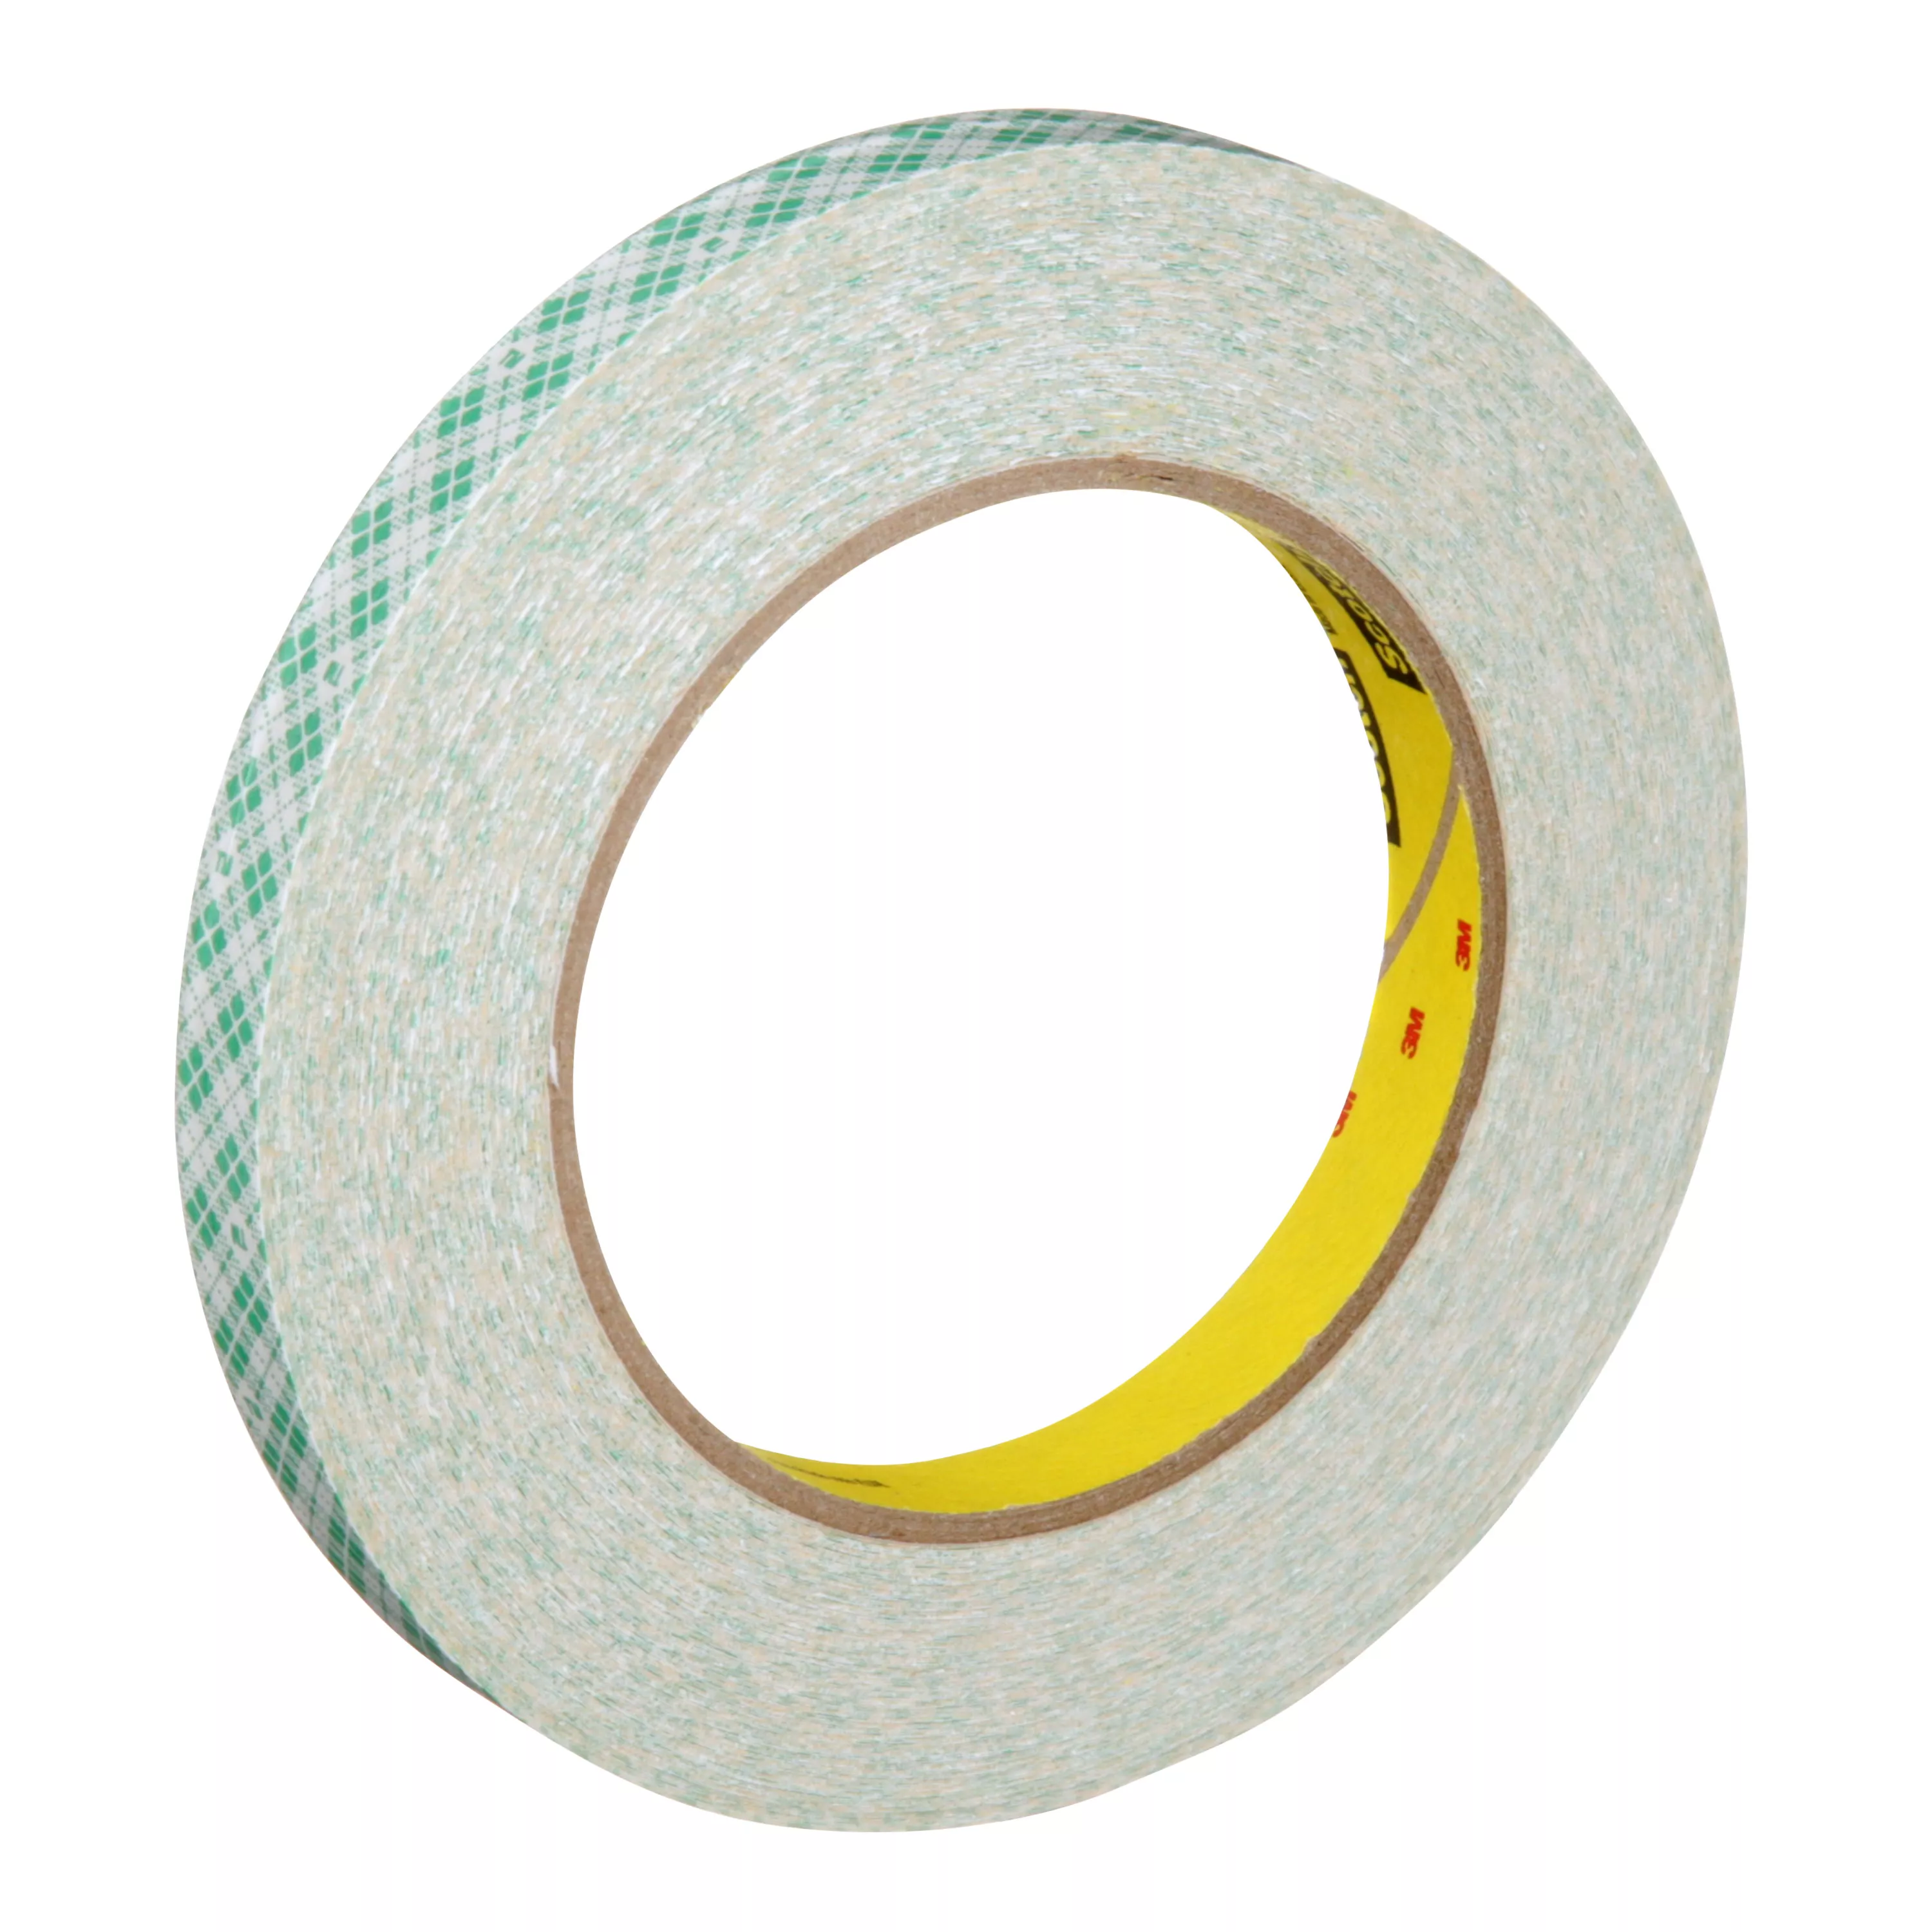 3M™ Double Coated Paper Tape 410M, Natural, 1/2 in x 36 yd, 5 mil, 72
Roll/Case